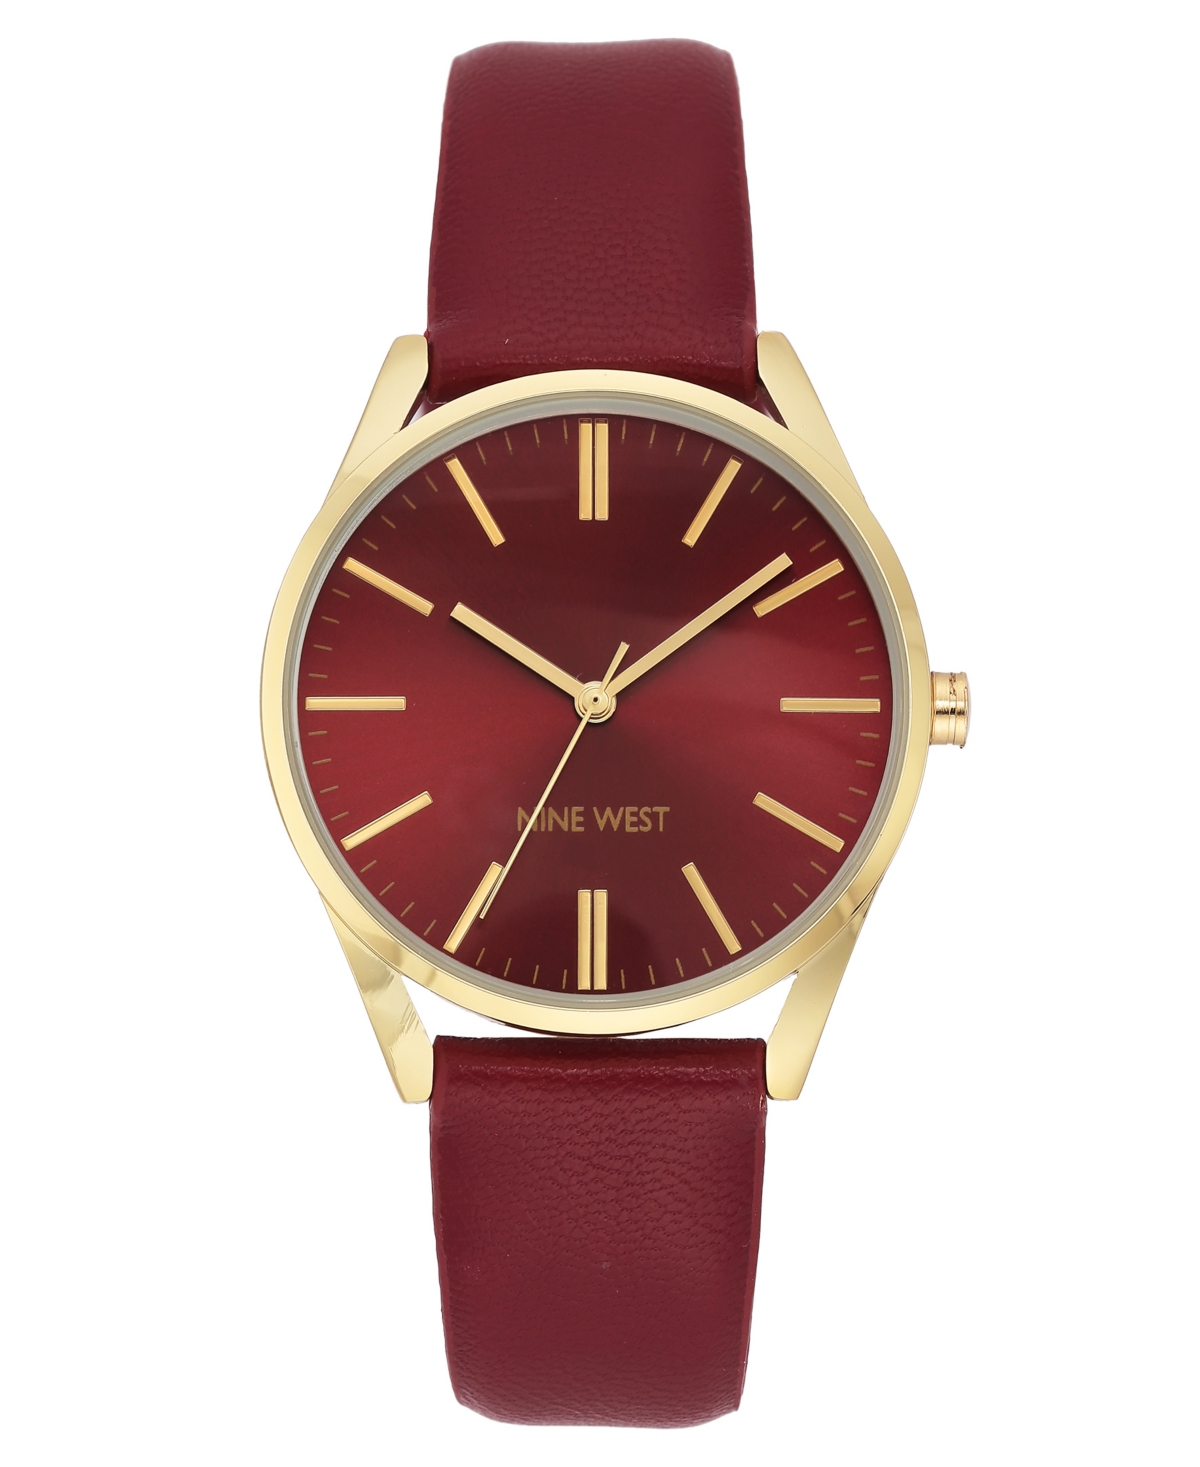 Nine West Women's Quartz Red Faux Leather Band Watch, 36mm In Red,gold-tone